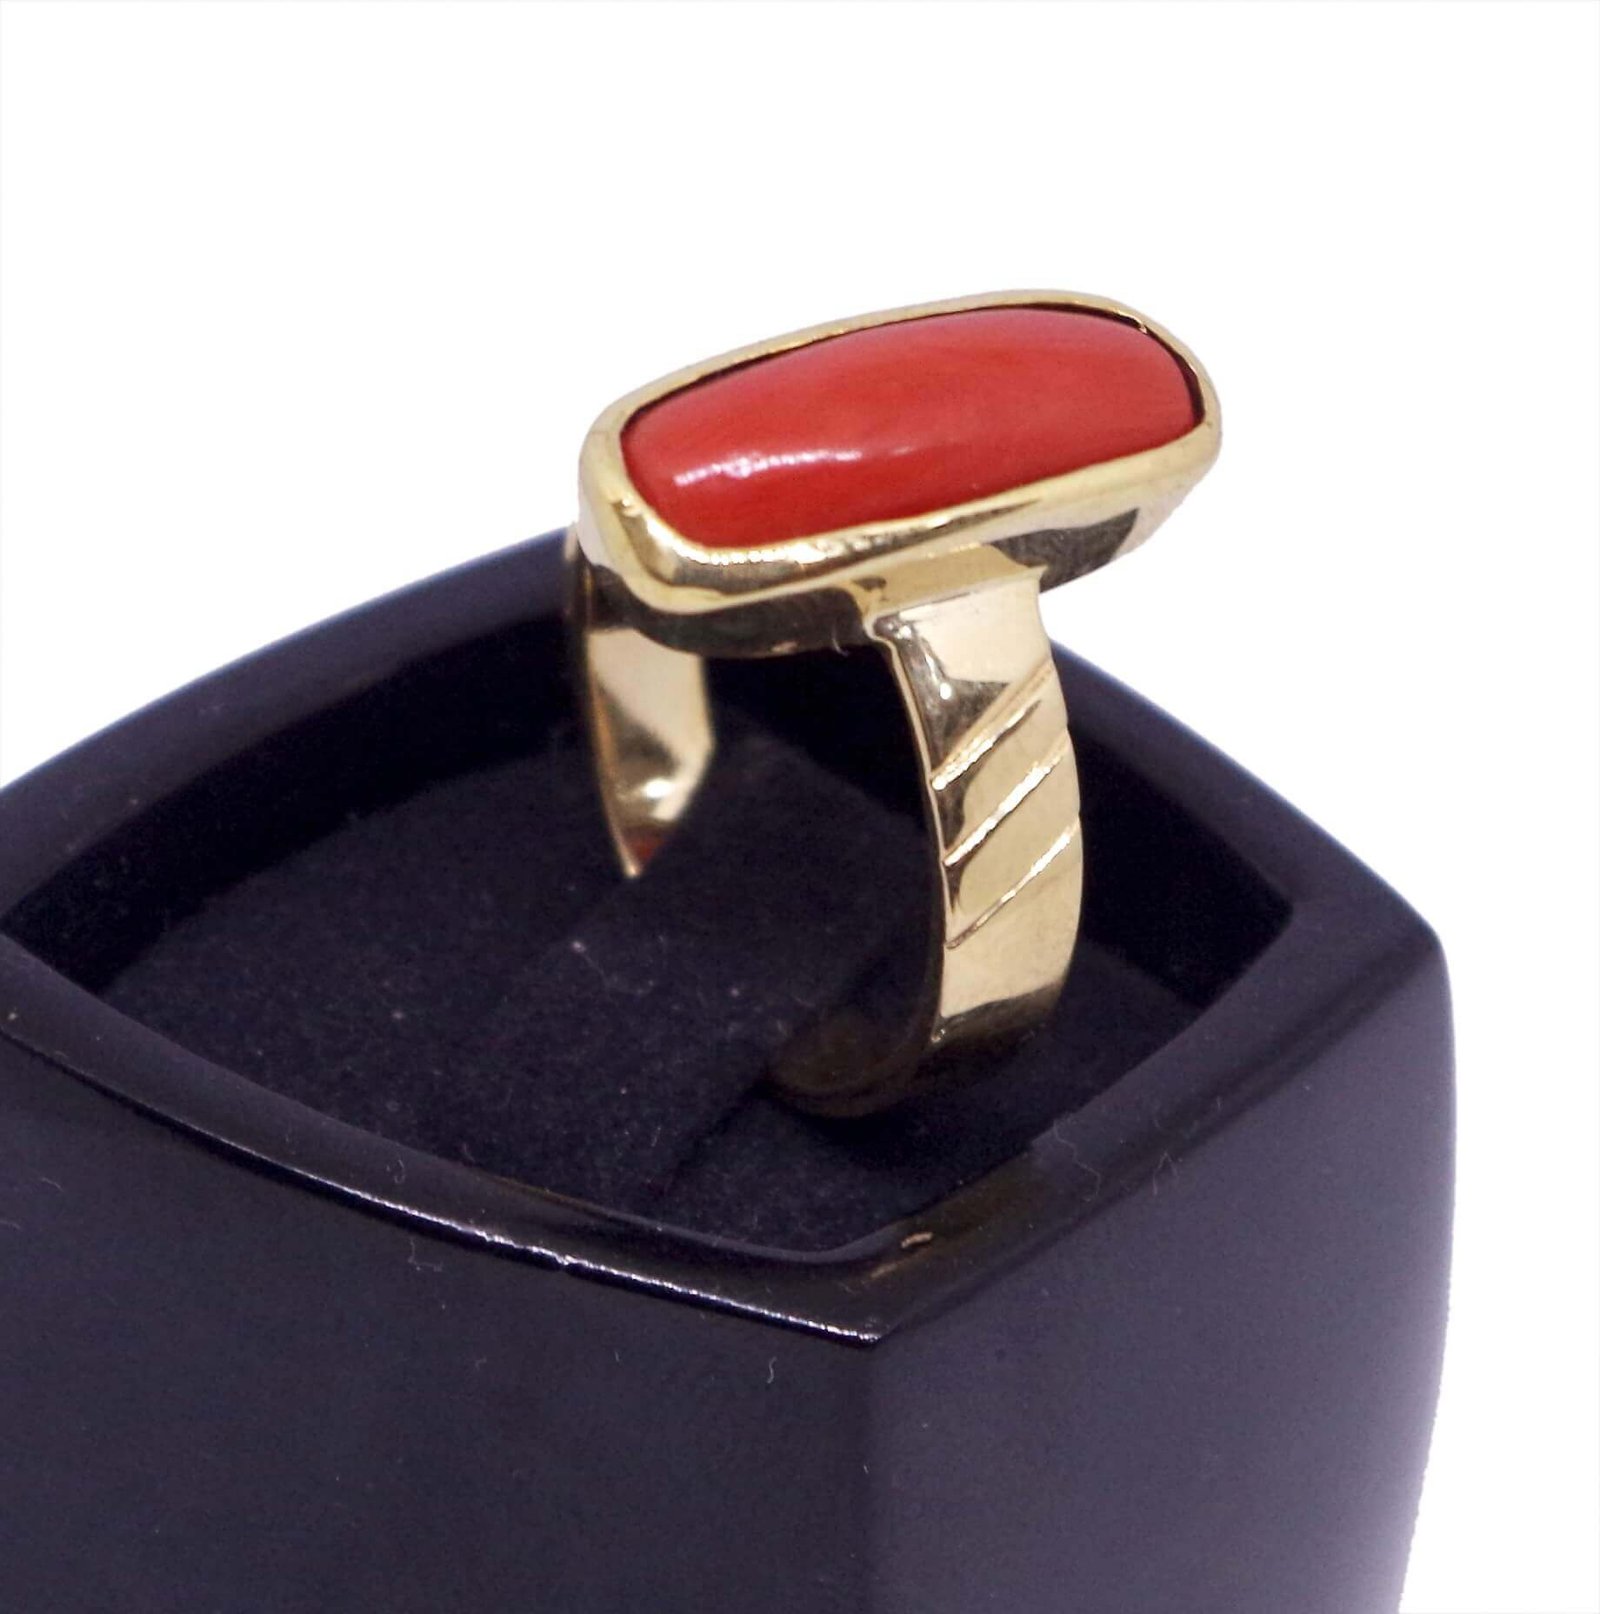 Gorgeous RED CORAL Gemstone Ring Birthstone Ring 925 Sterling Silver Ring —  Discovered